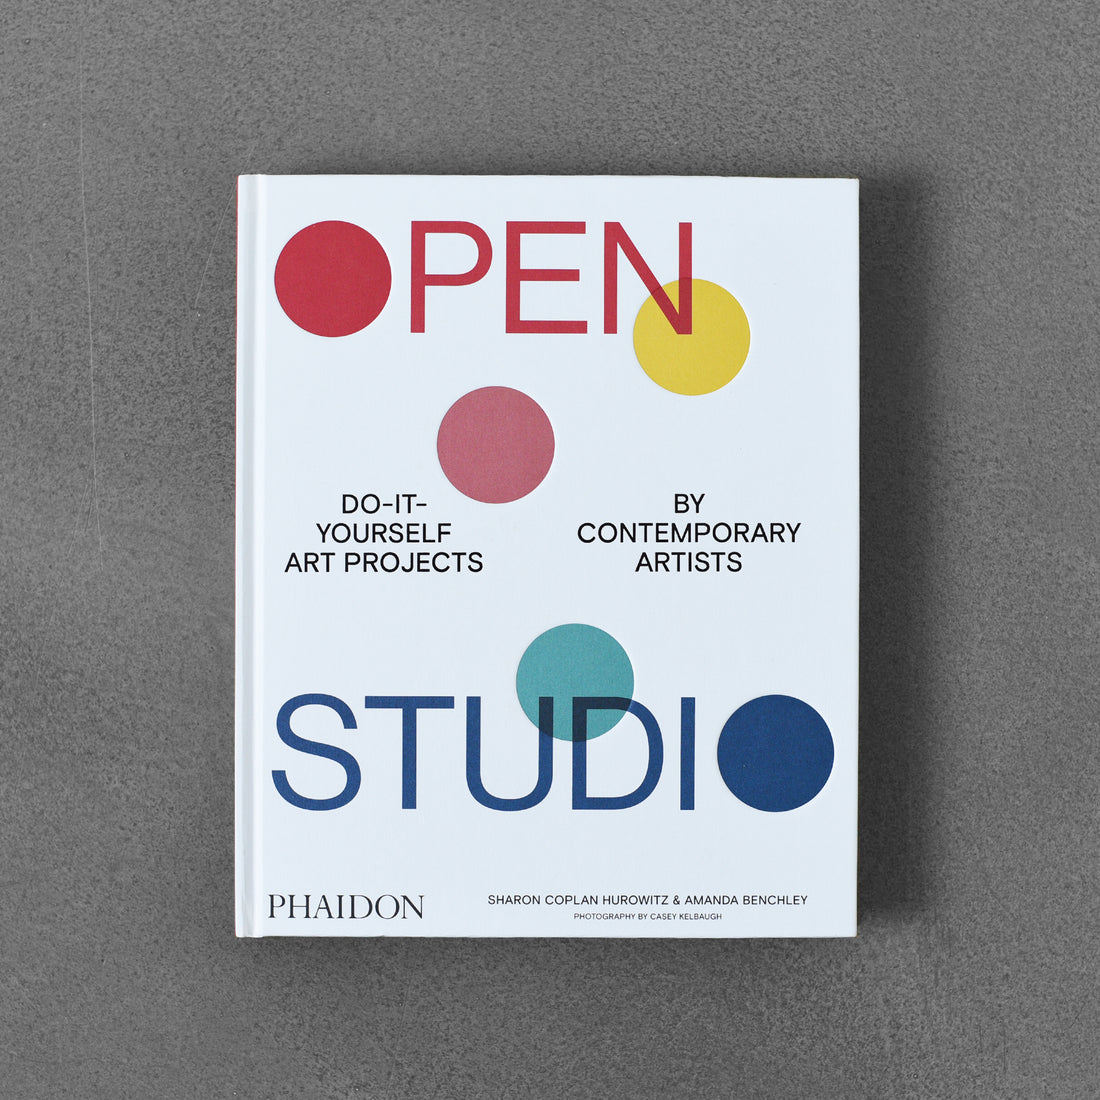 Open Studio: Do-it-yourself Art Projects by Contemporary Artists - Sharon Coplan Hurowitz, Amanda Benchley